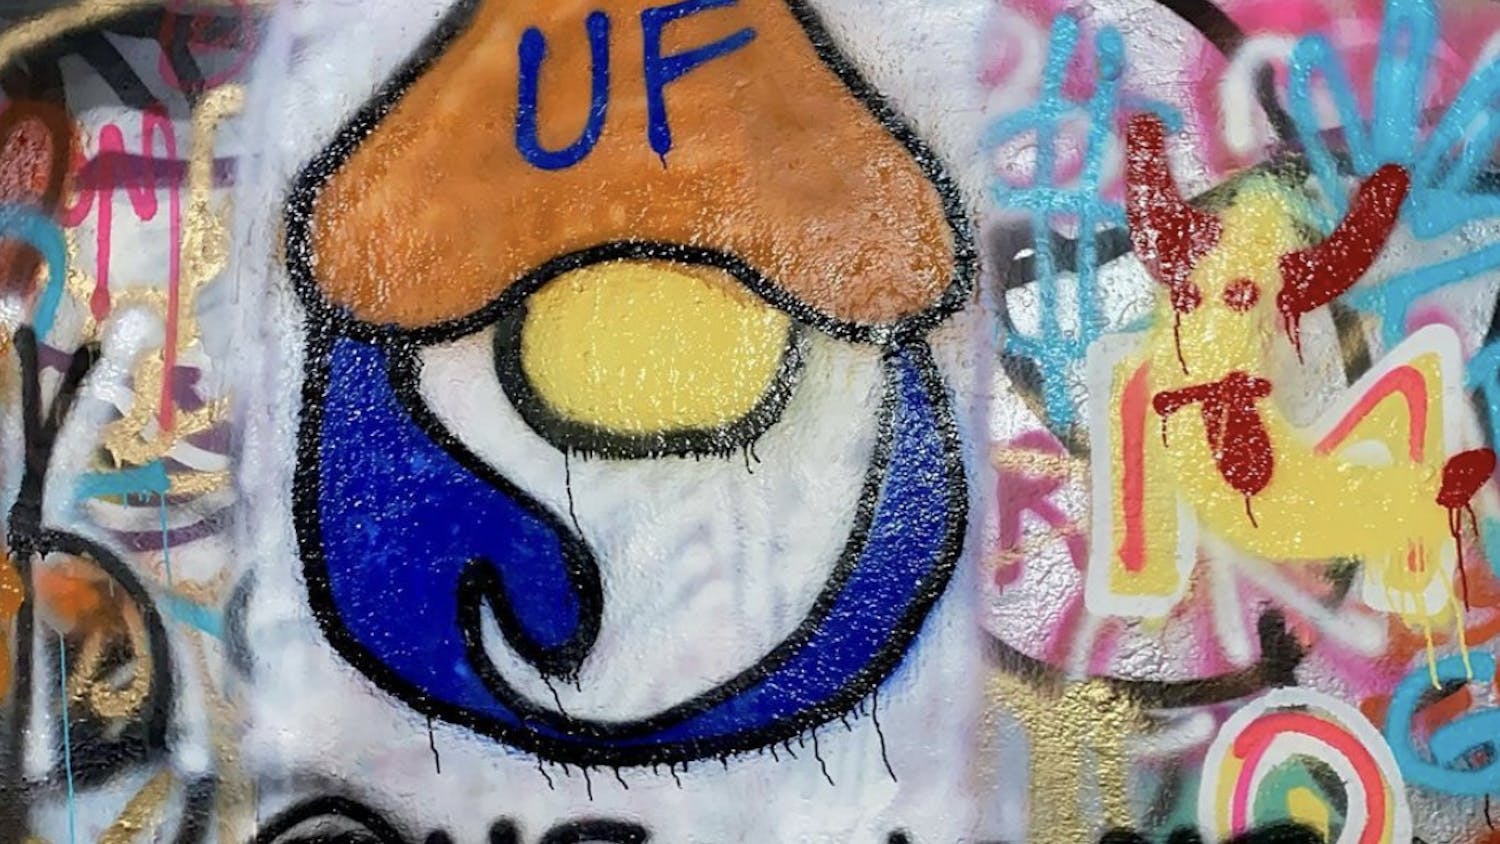 Graffiti of the UF gnome painted in August inside the tunnel near Norman Hall.